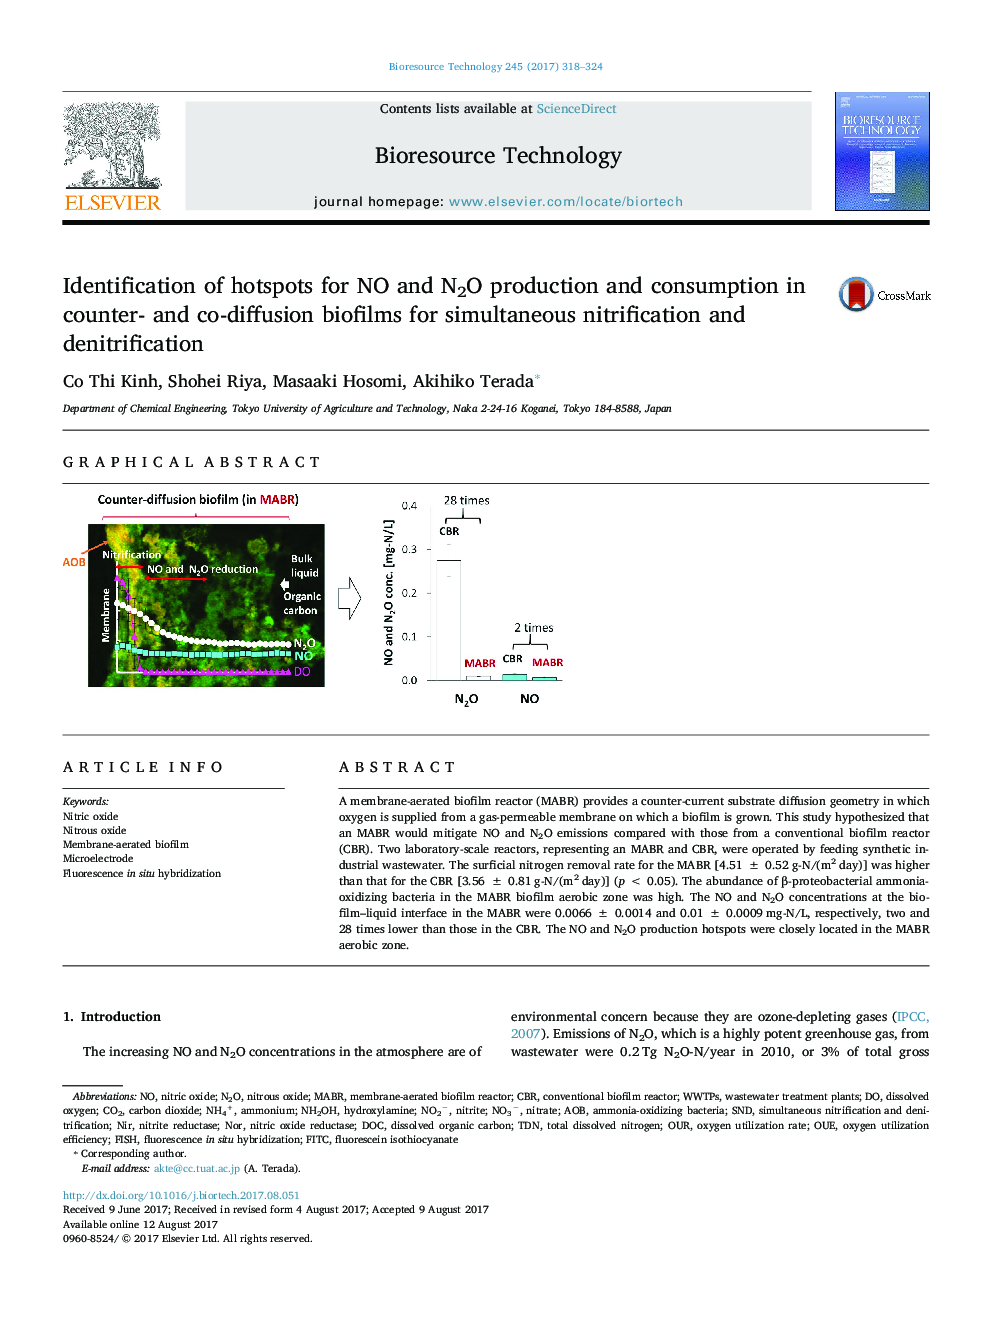 Identification of hotspots for NO and N2O production and consumption in counter- and co-diffusion biofilms for simultaneous nitrification and denitrification